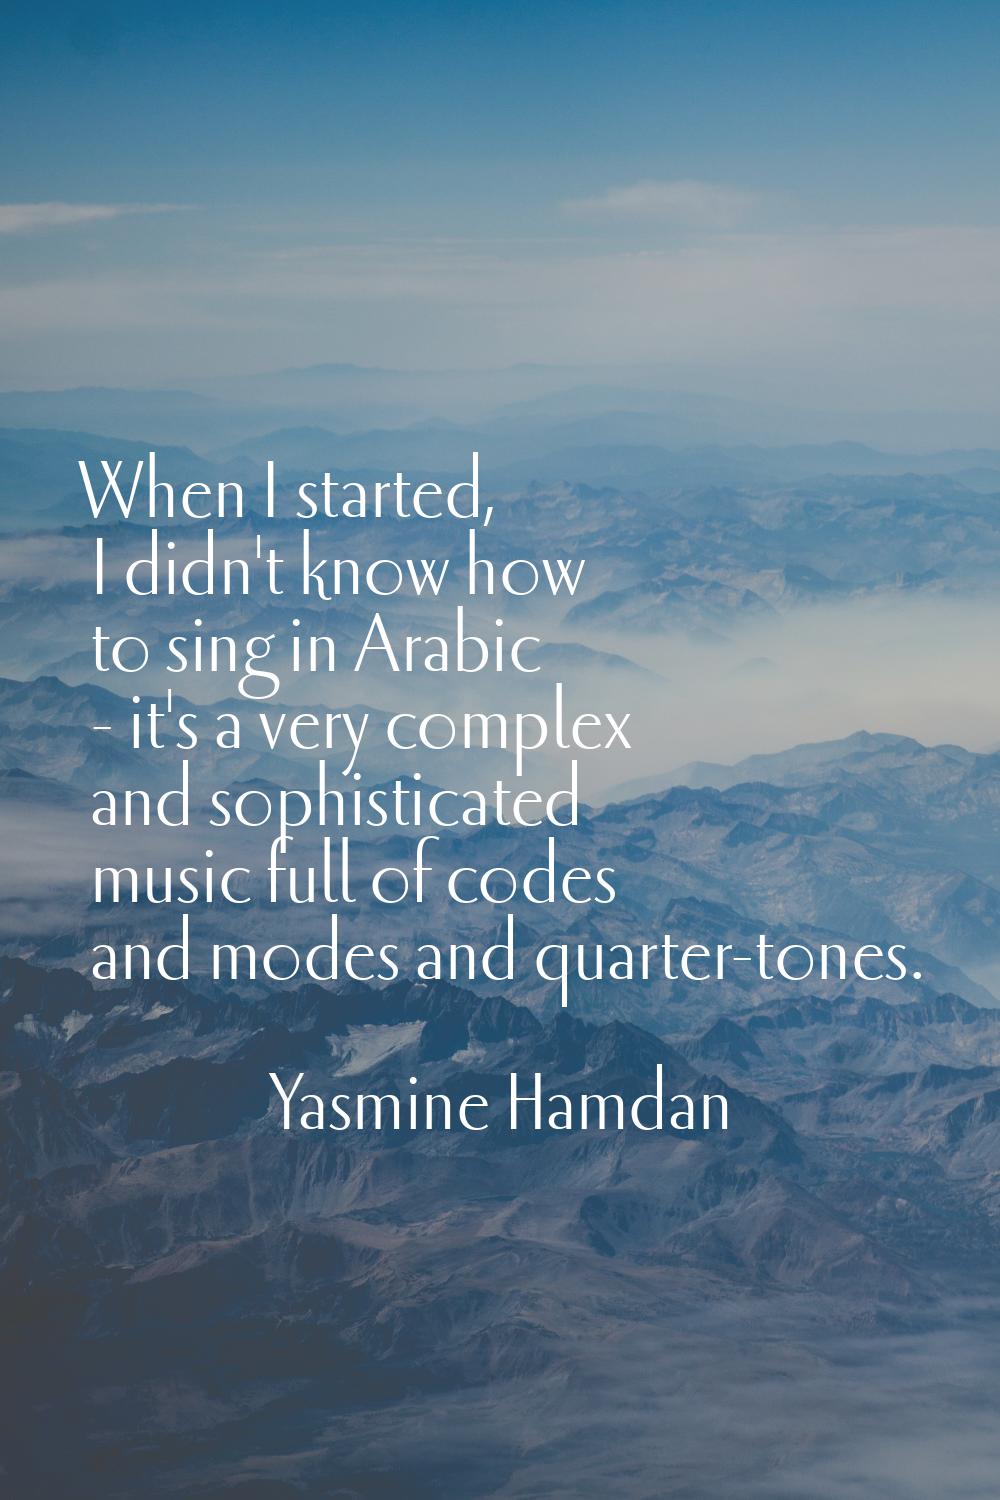 When I started, I didn't know how to sing in Arabic - it's a very complex and sophisticated music f